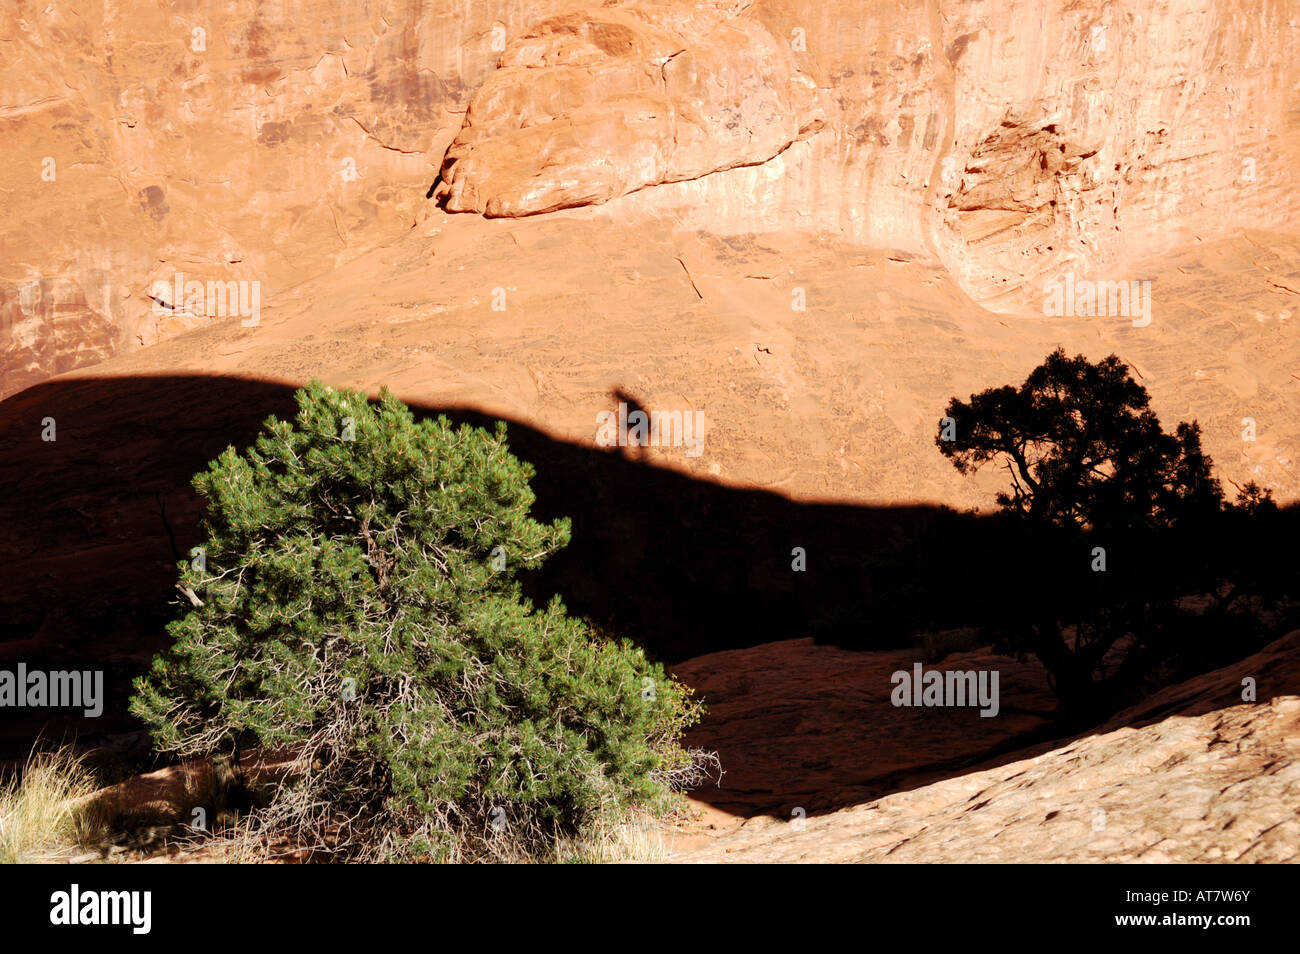 Shadow of Cocopelli on the sandstone cliff. Arches National Park, Moab, Utah. Stock Photo